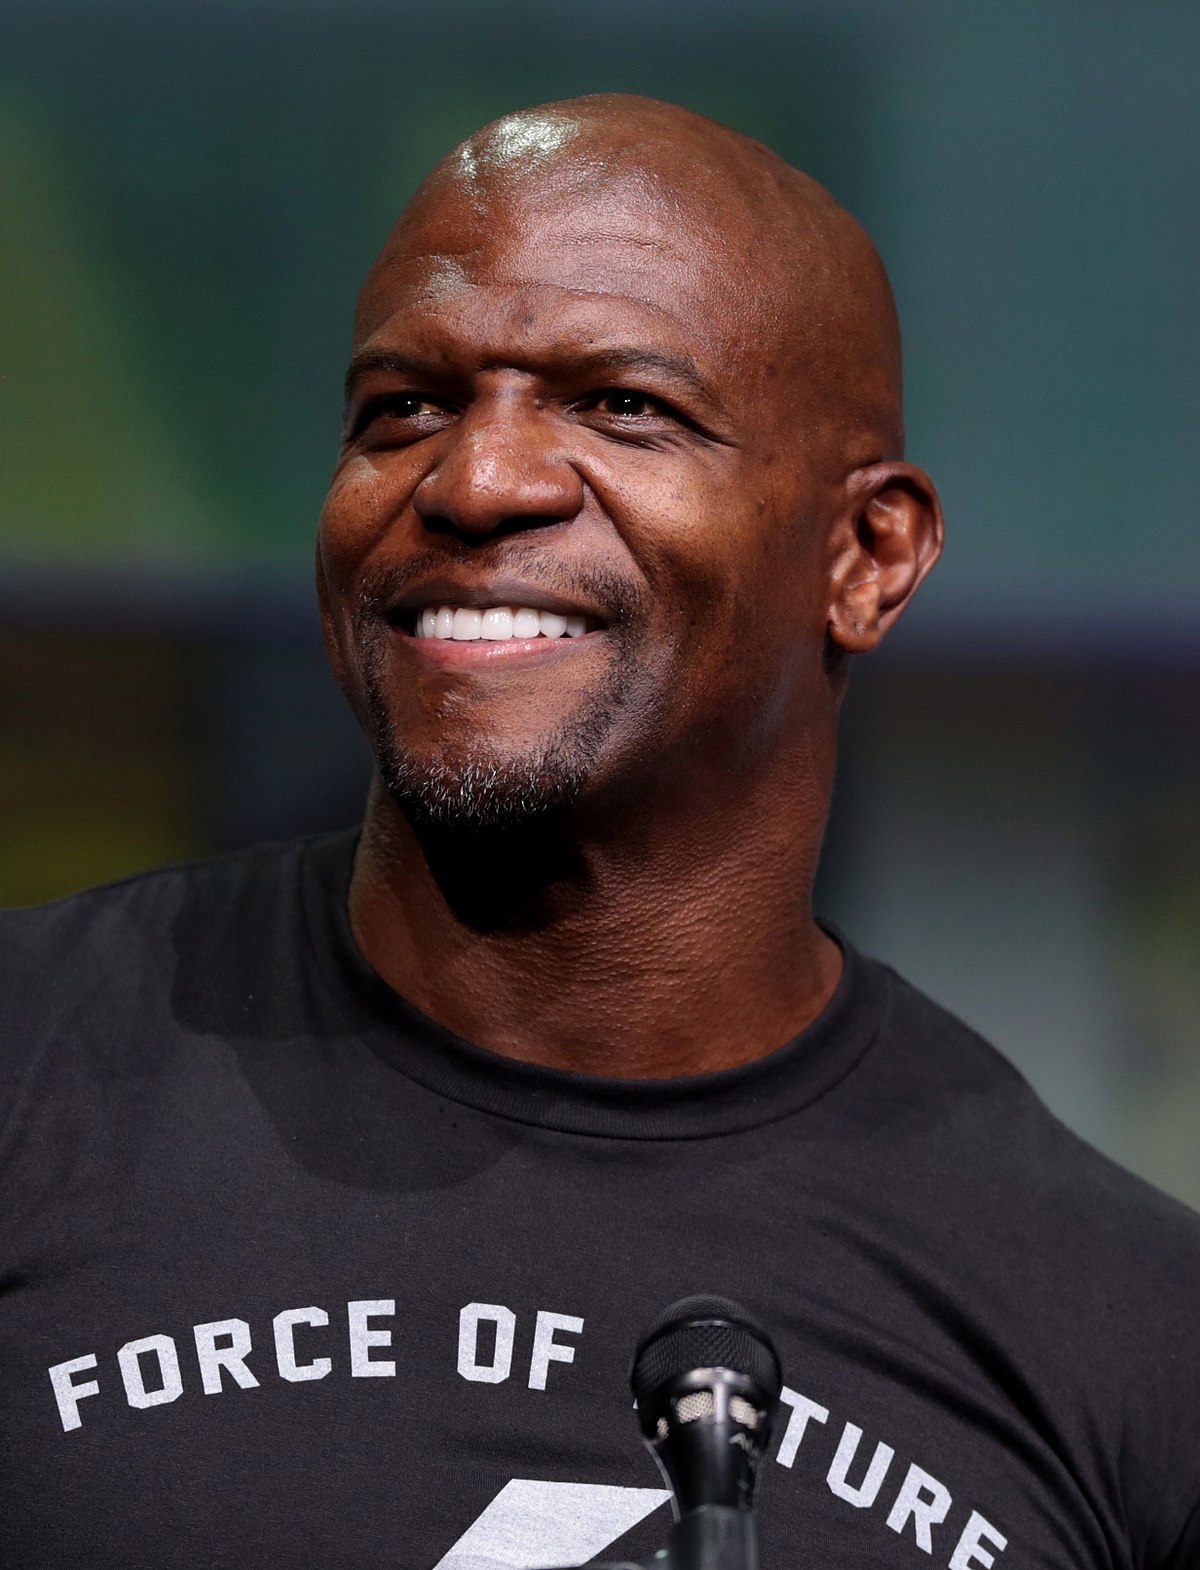 How tall is Terry Crews?